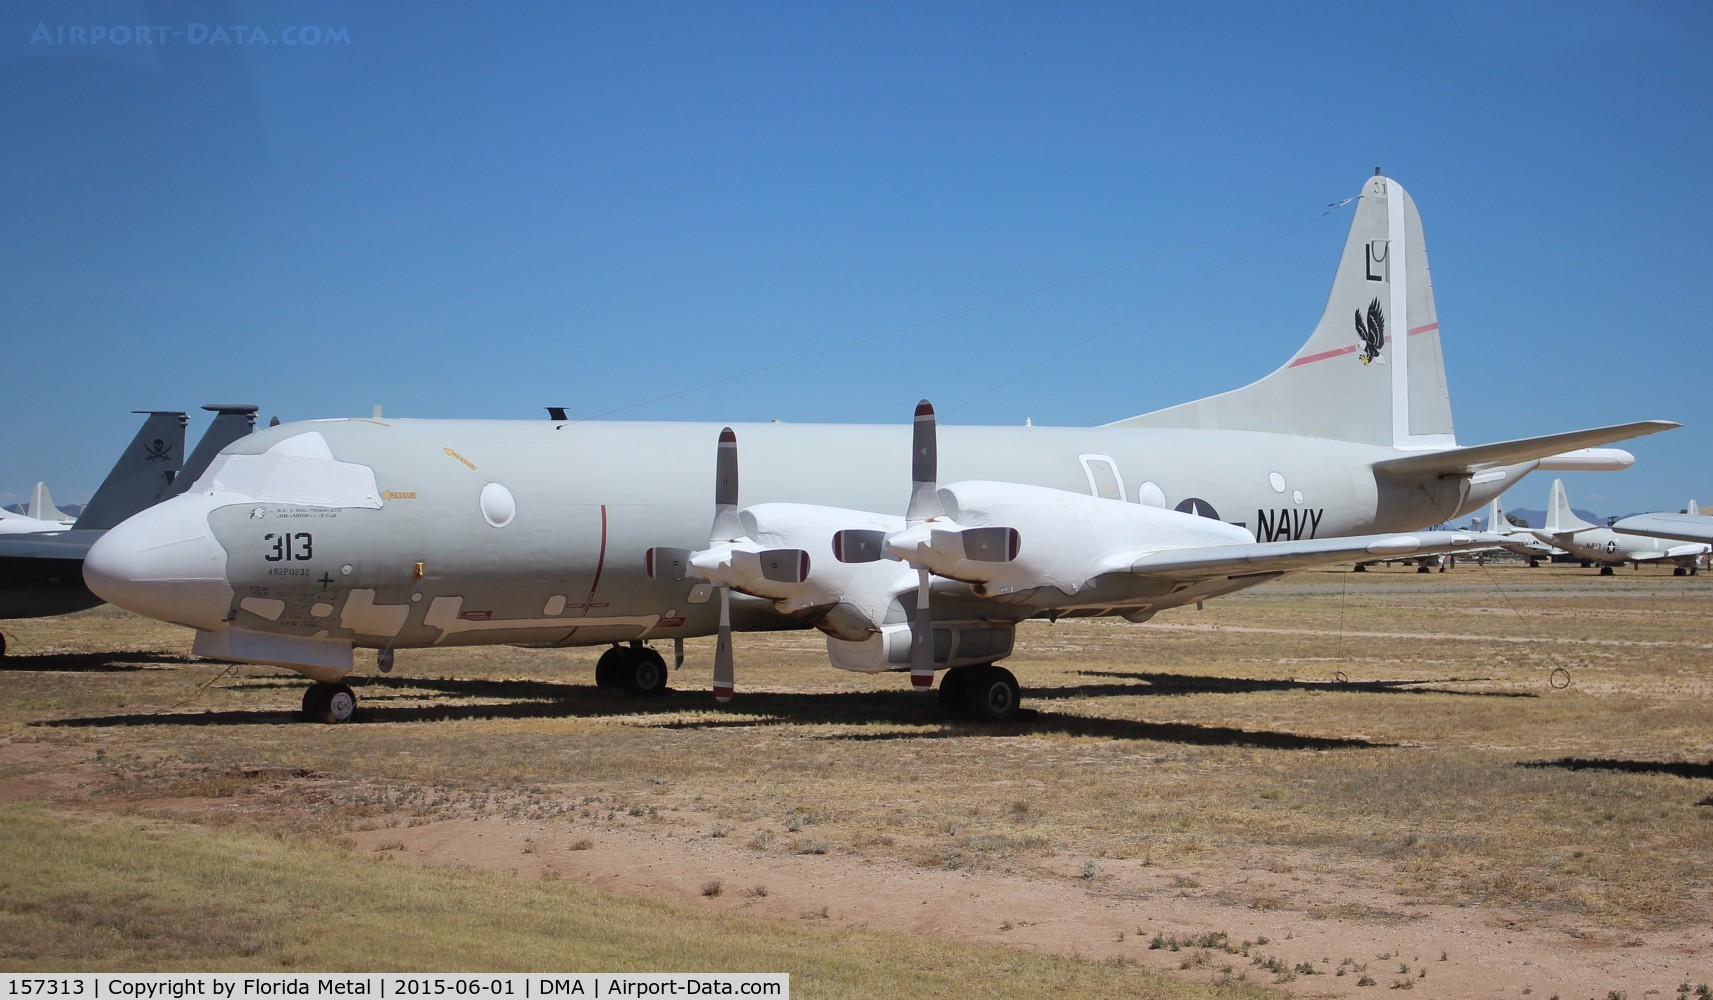 157313, Lockheed P-3C Orion C/N 285A-5528, P-3C Orion